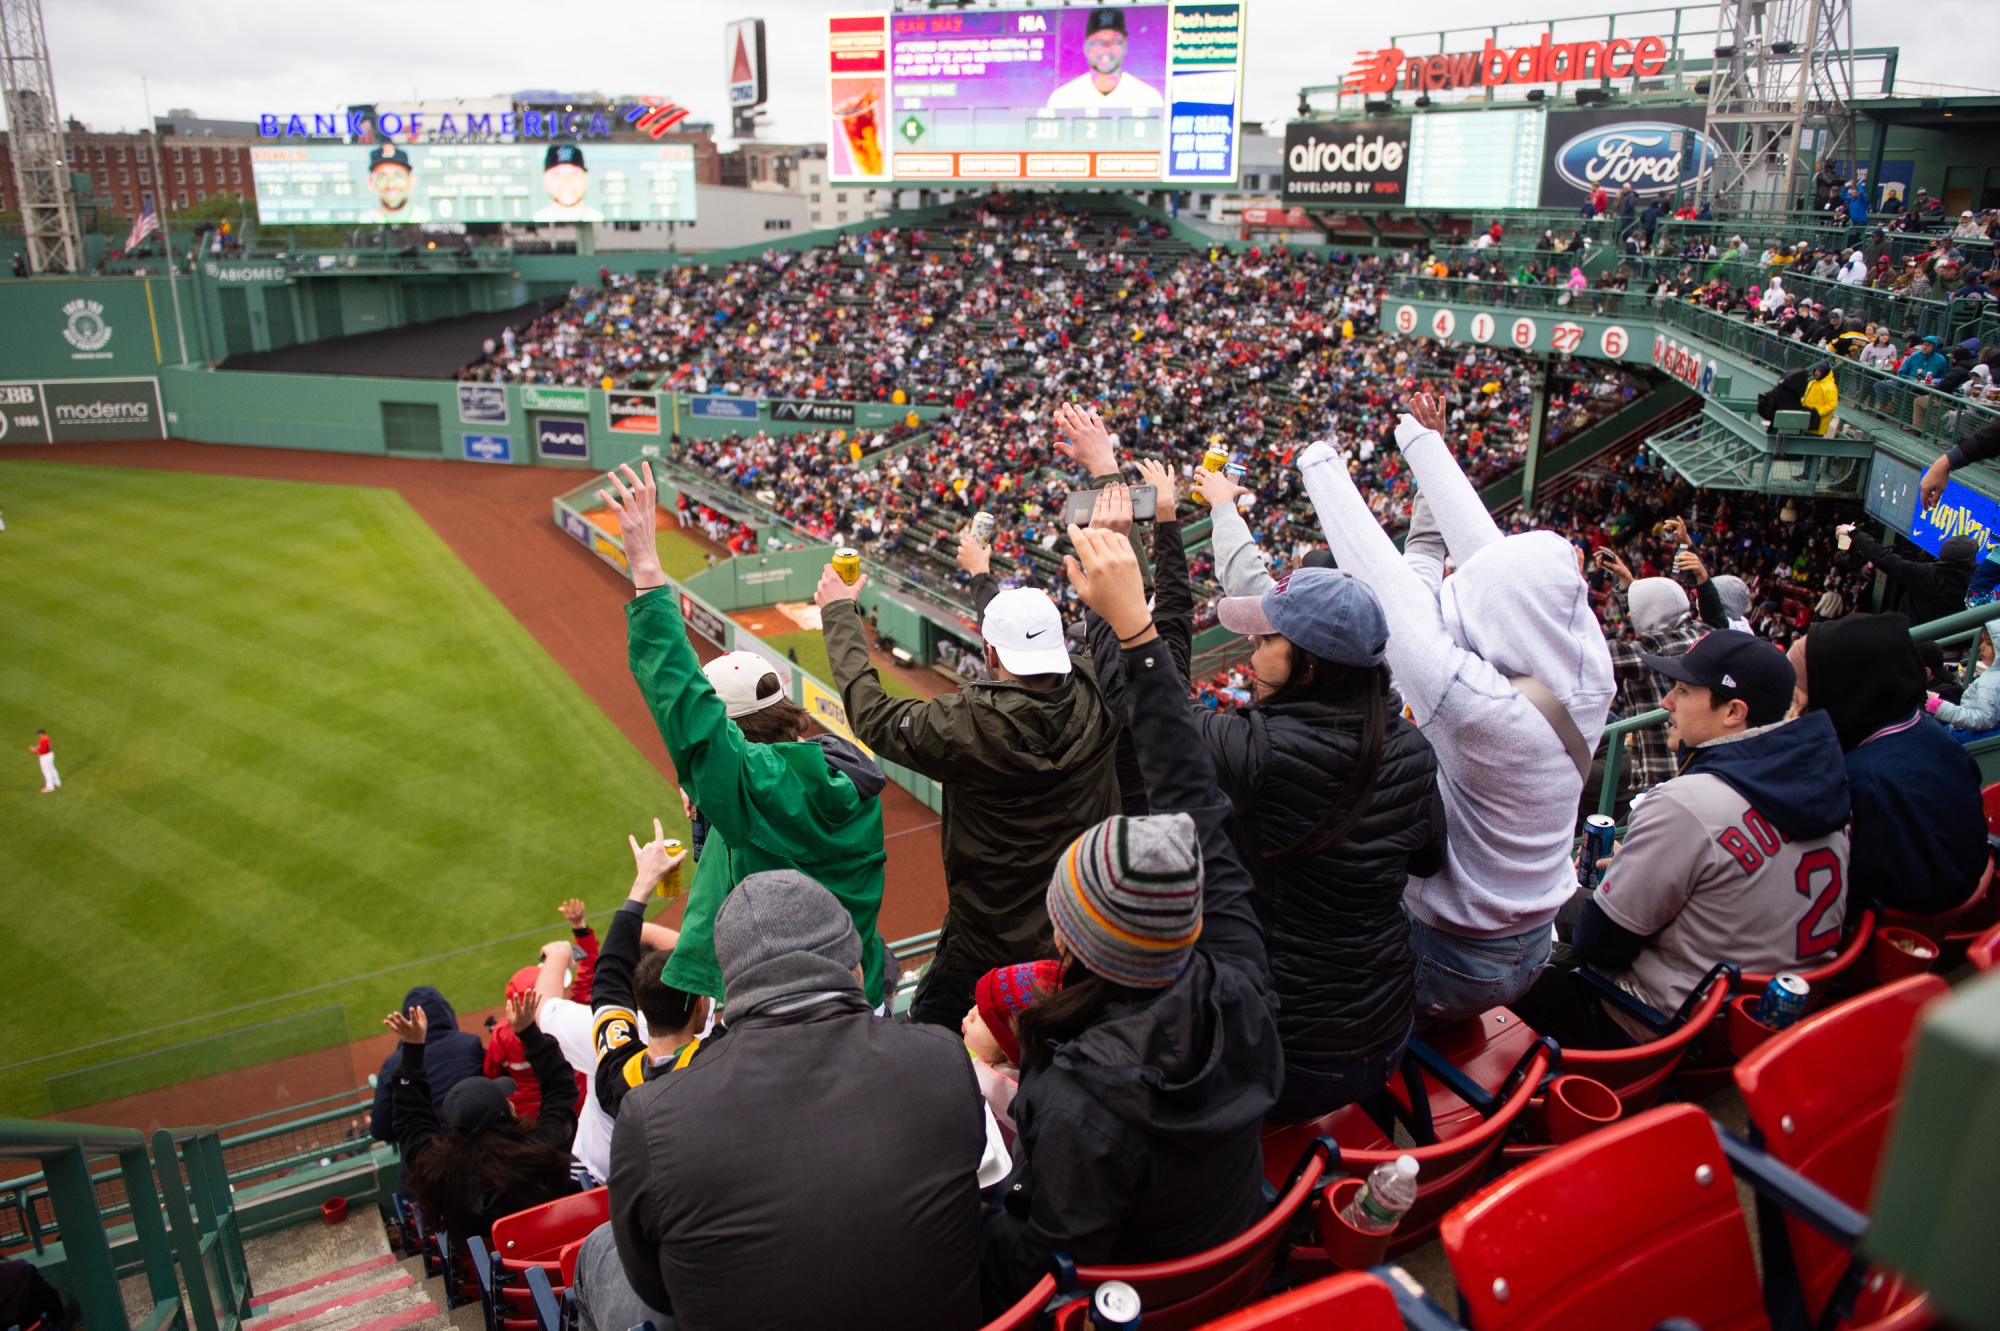 Red Sox: Ranking players who have had numbers retired at Fenway Park